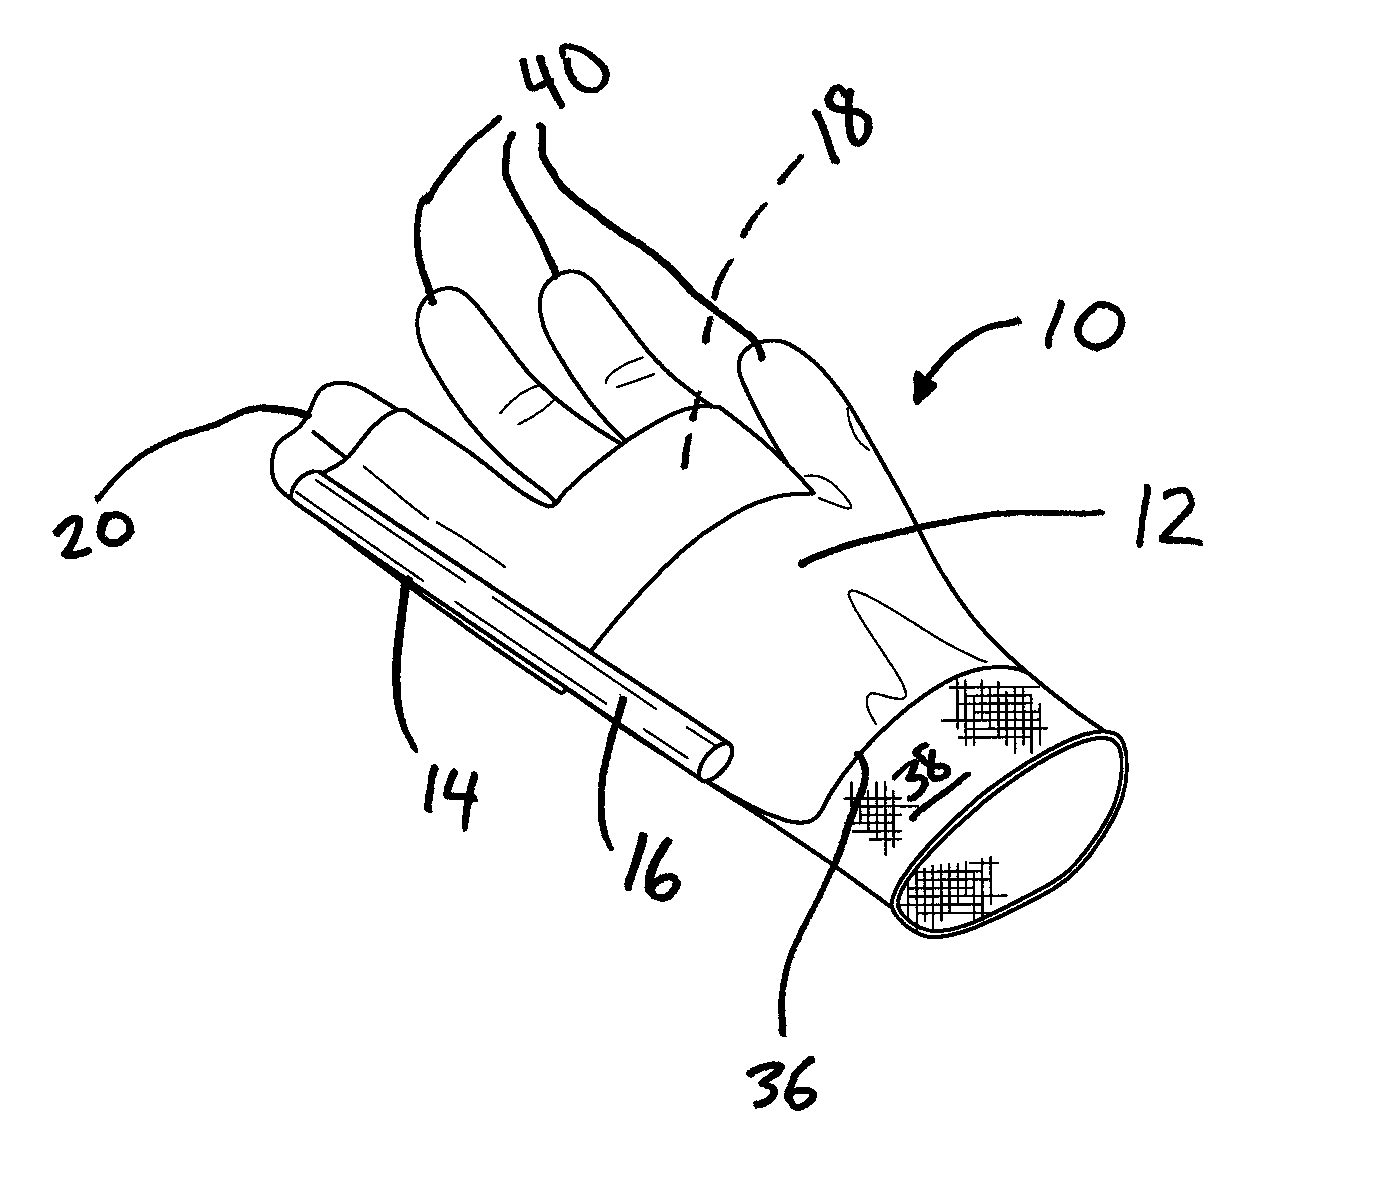 Glove and method for grouting tile